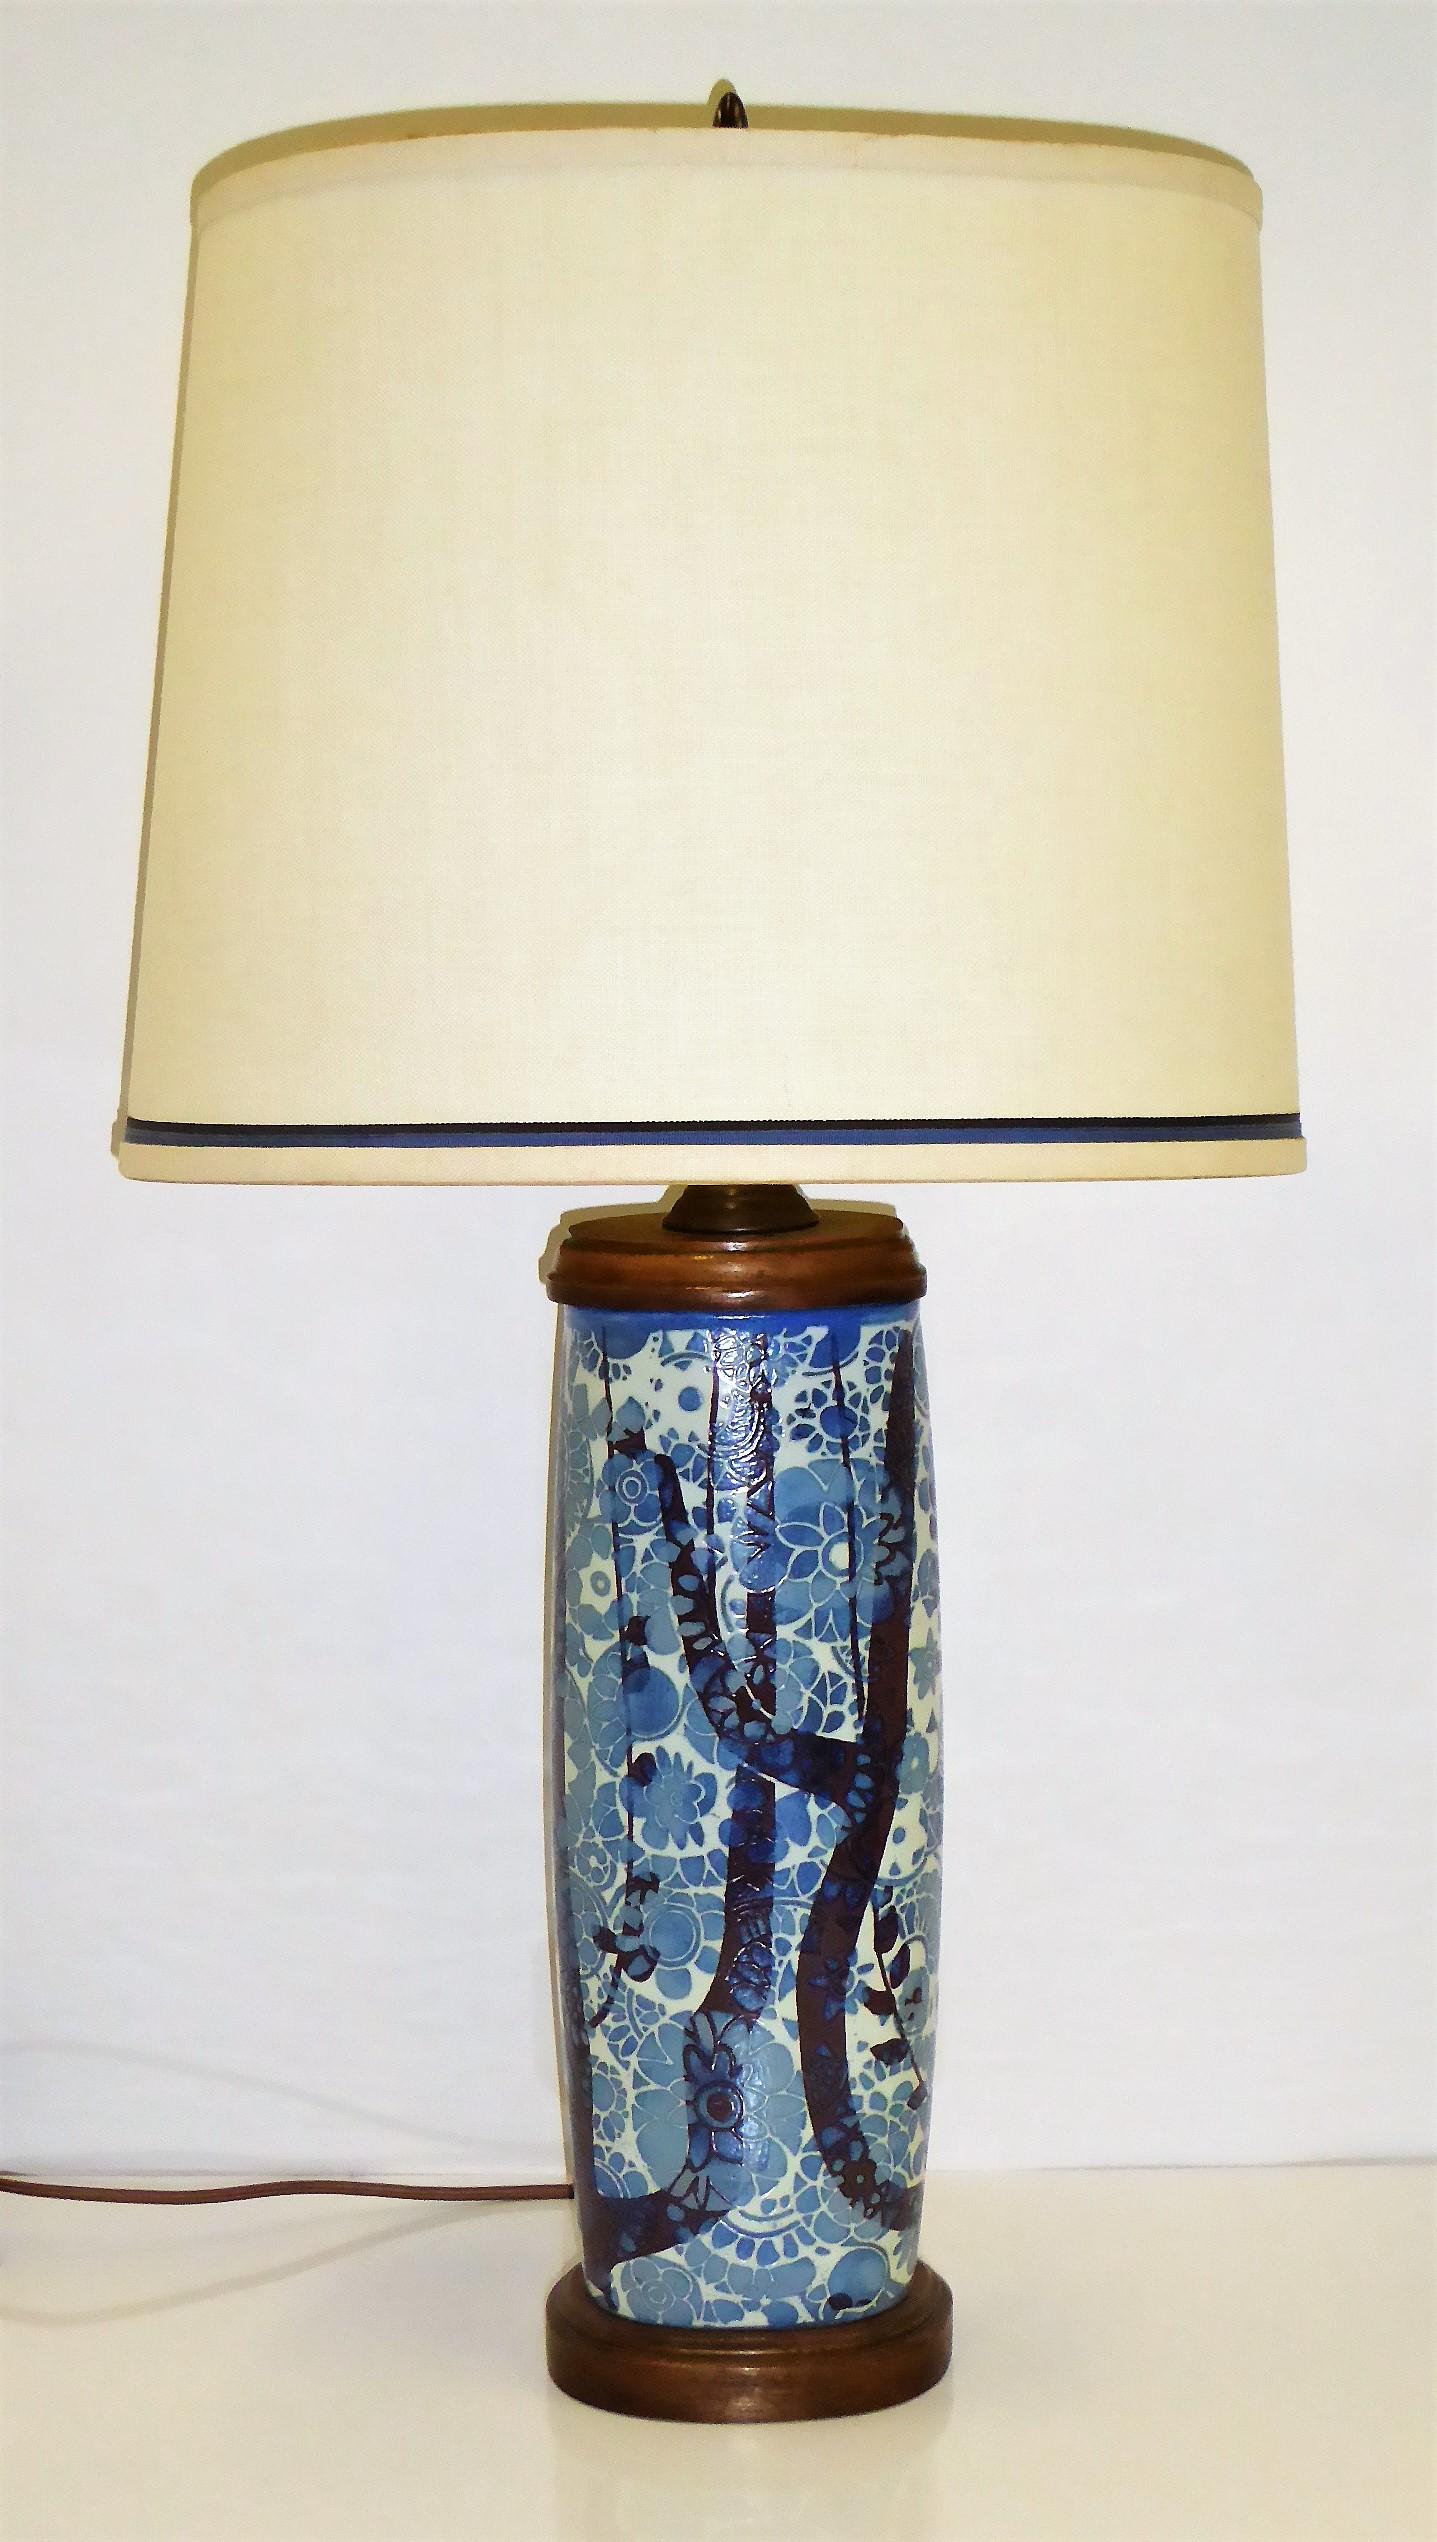 An elegant and Classic Danish vase exquisitely mounted as a table lamp. Nils Thorsson created the Baca series of pottery for Aluminia/Royal Copenhagen and on this particular form of vase from 1965, the artist Johanne Gerber designed the wood &